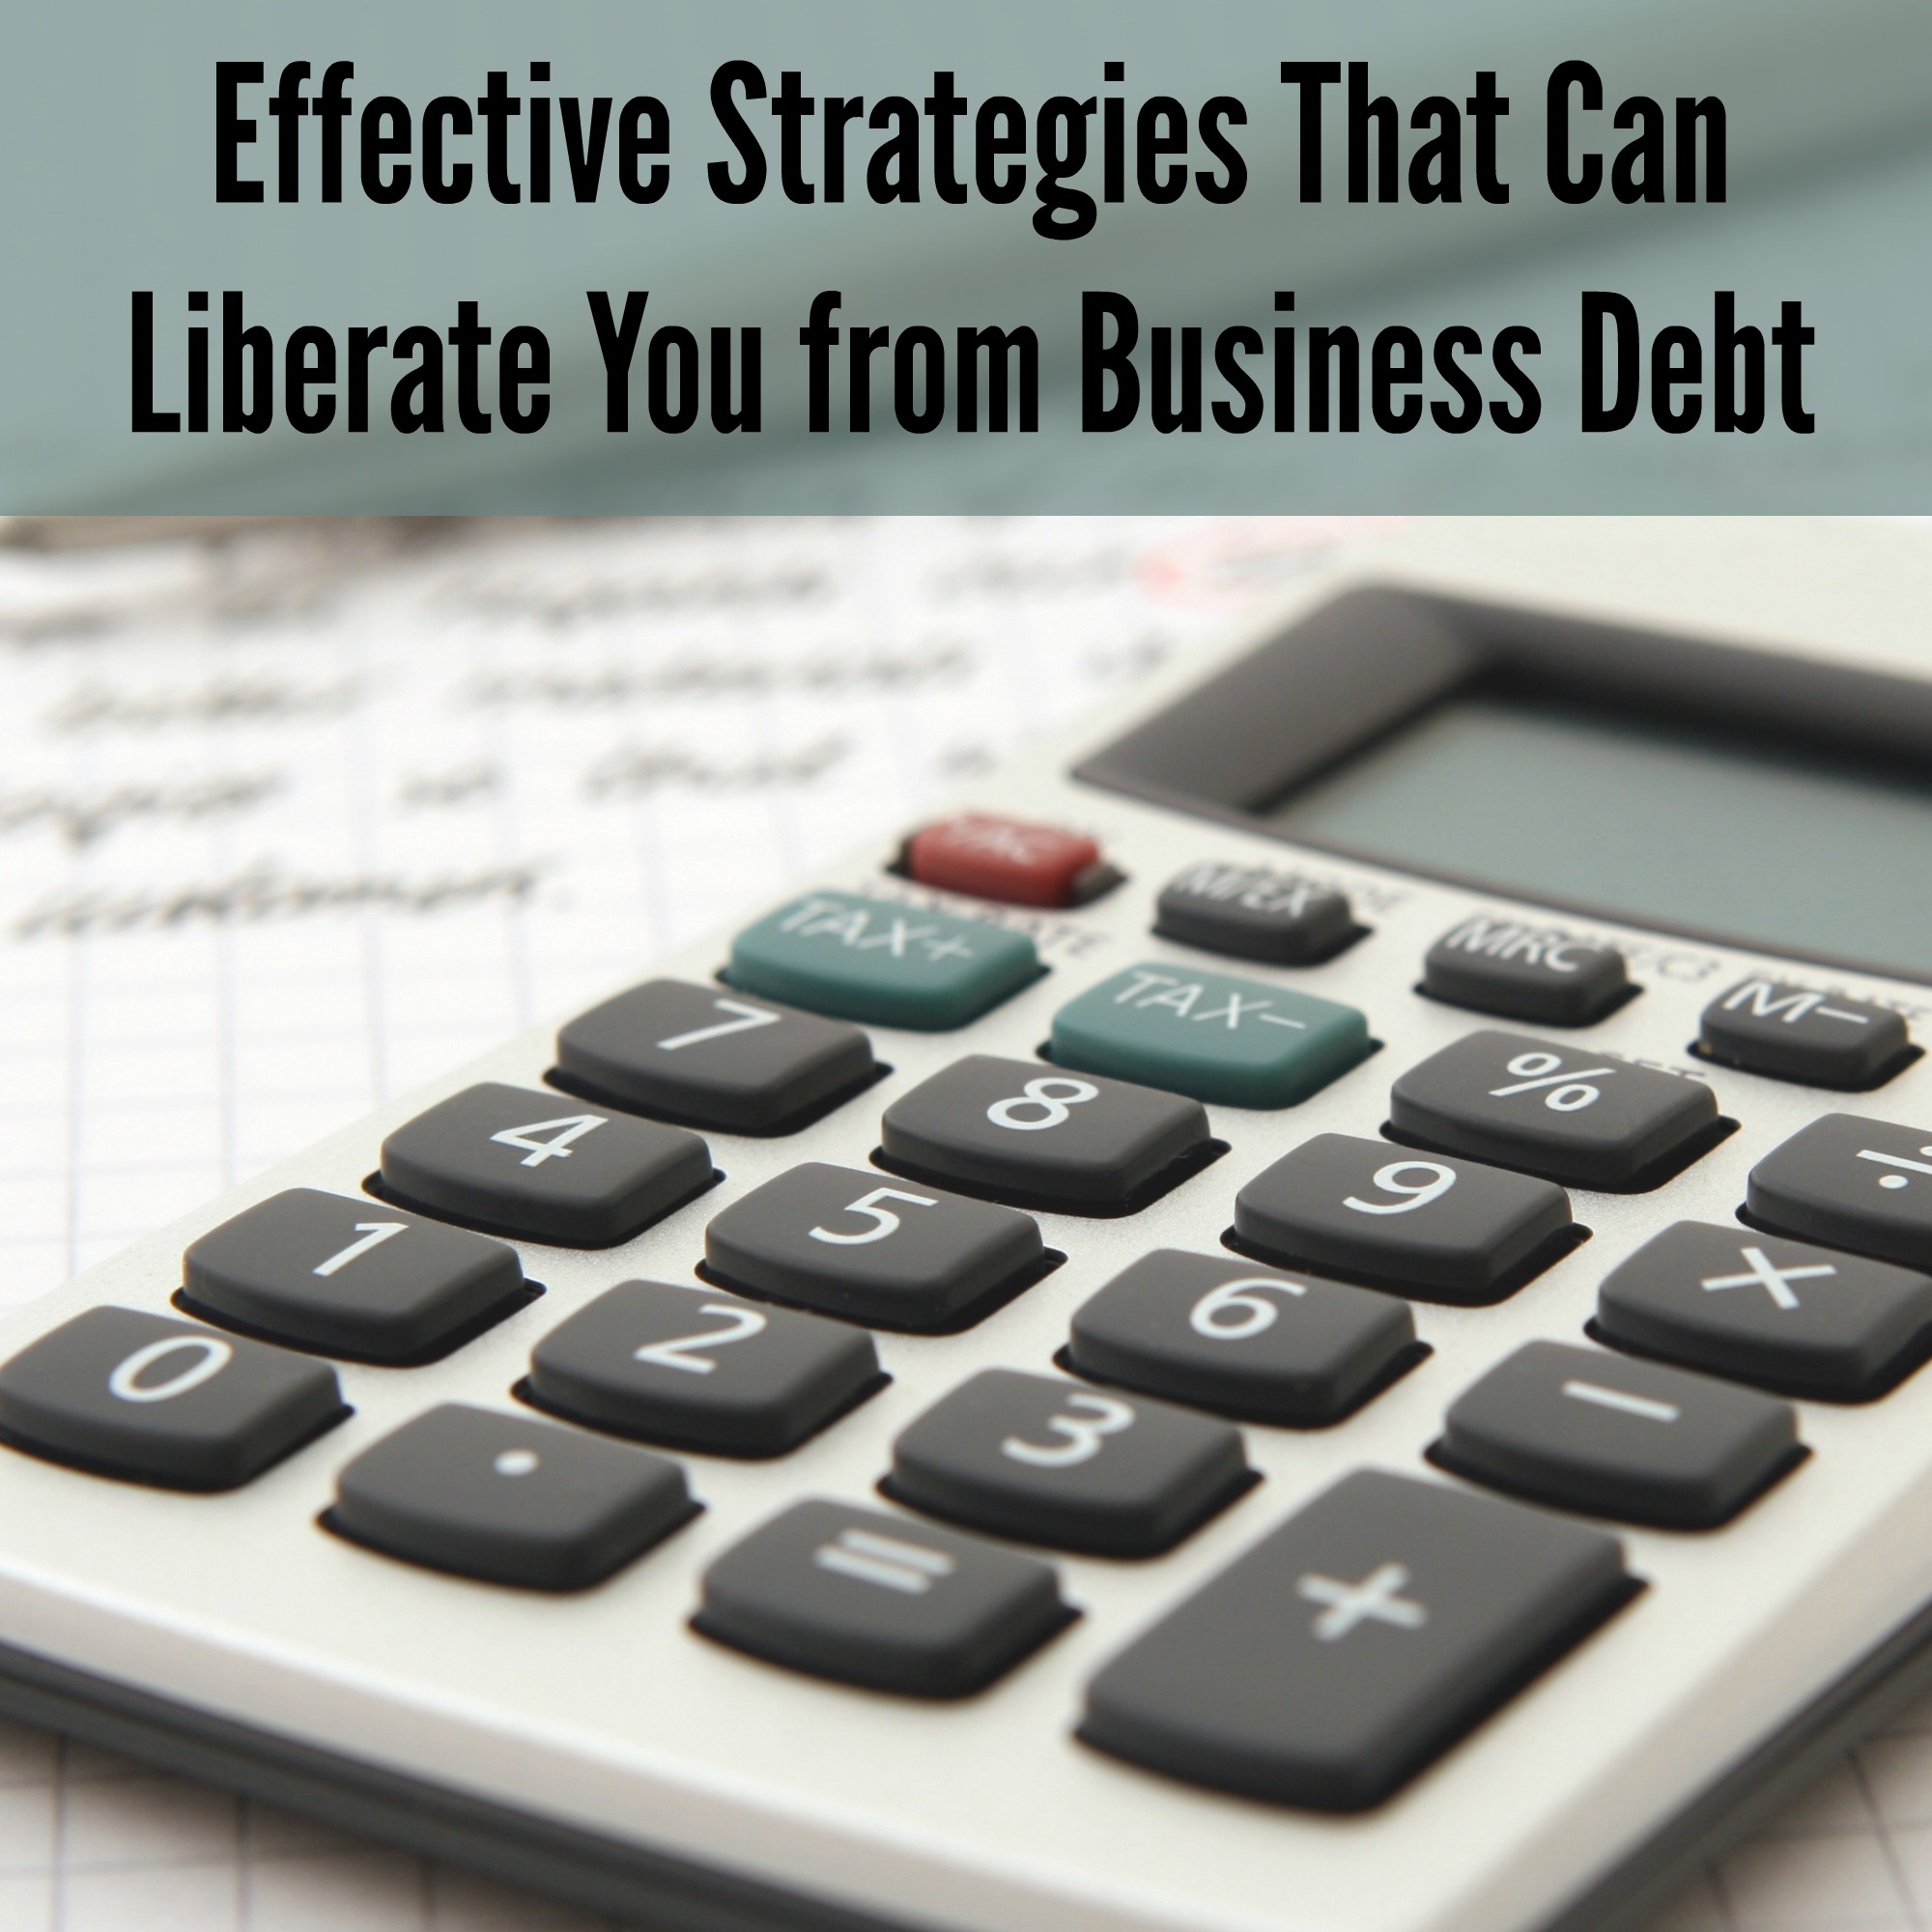 Effective Strategies That Can Liberate You from Business Debt